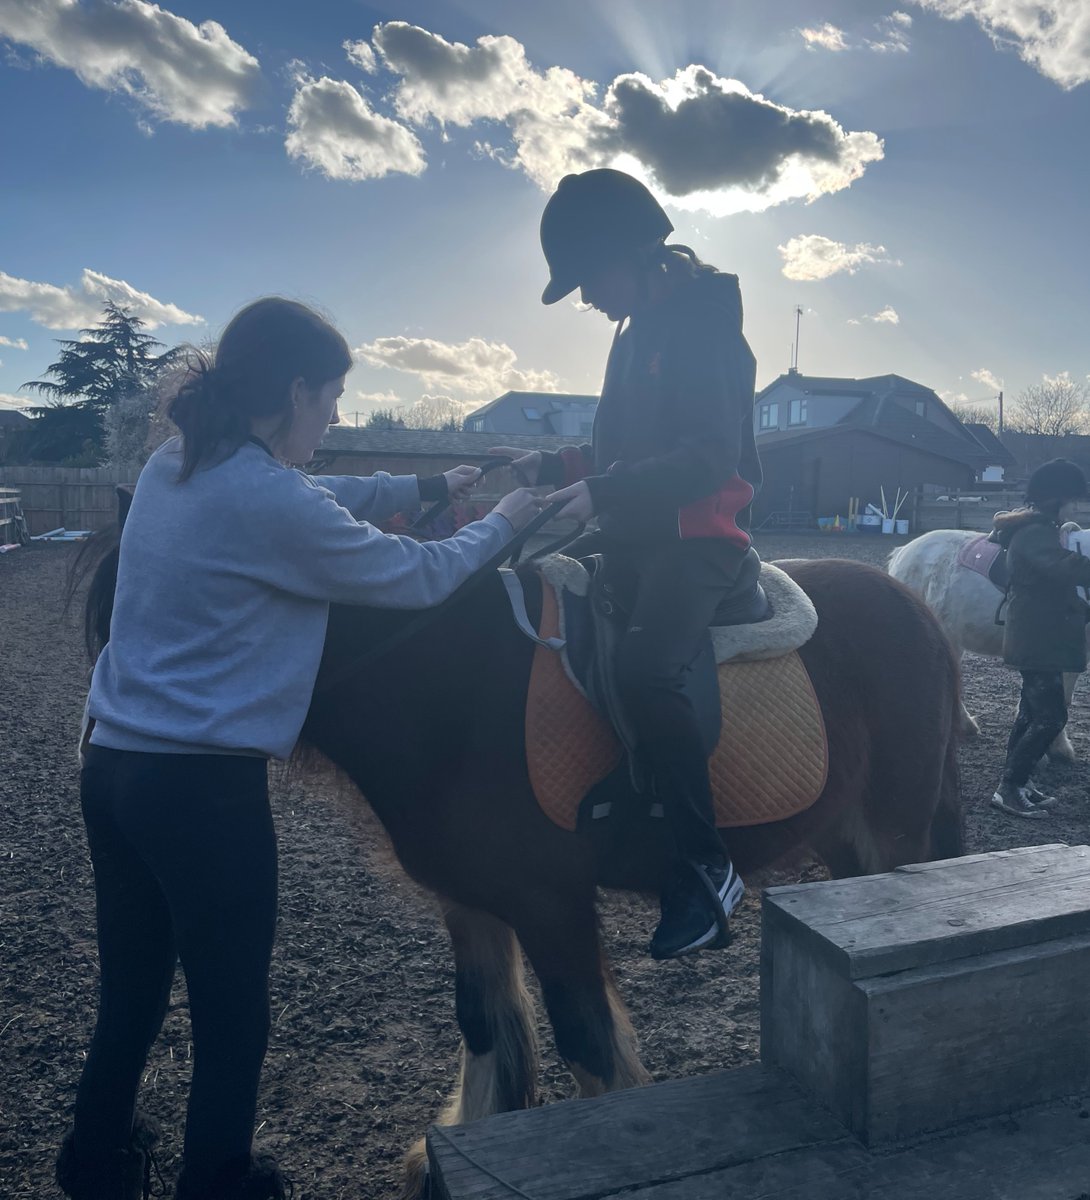 #Year7 and #Year8 students have been showcasing their impressive #Horse riding skills at Ramblers riding school! Well done to all! #KingJohn #KingJohnSchool #KJS #Benfleet #Zenith